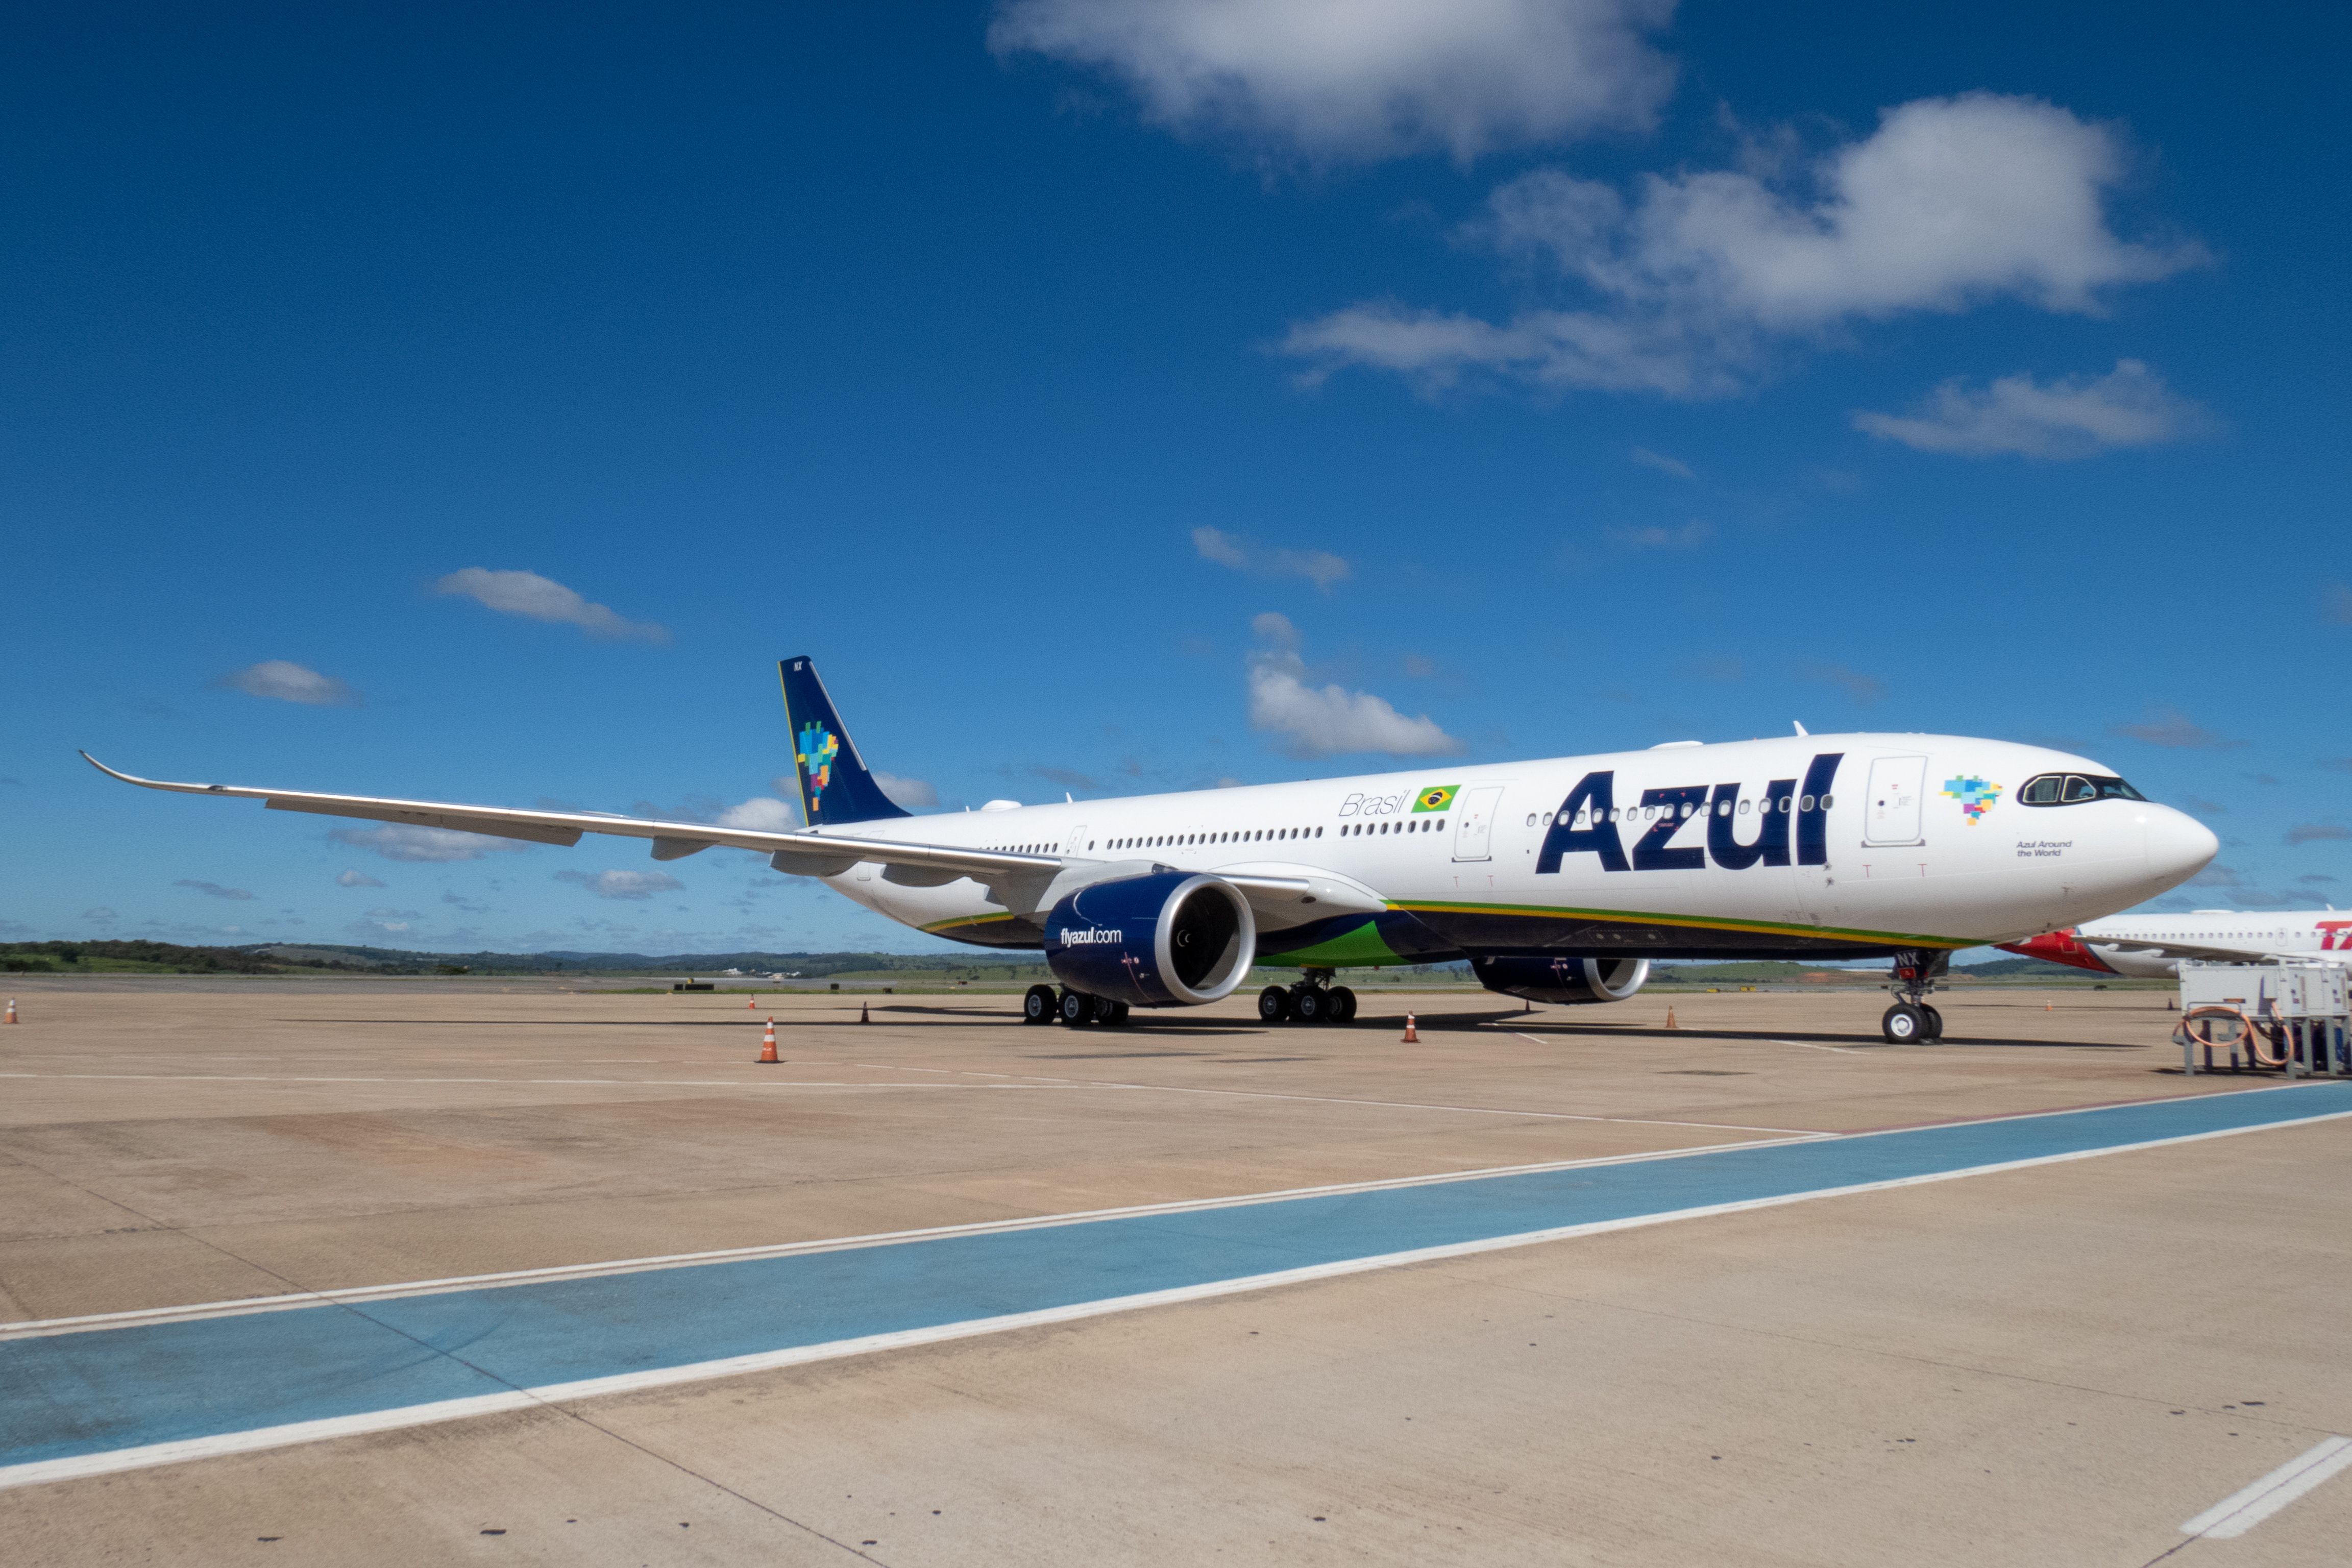 Azul passengers can now use an app to offset CO2 emissions and support Amazon Rainforest projects